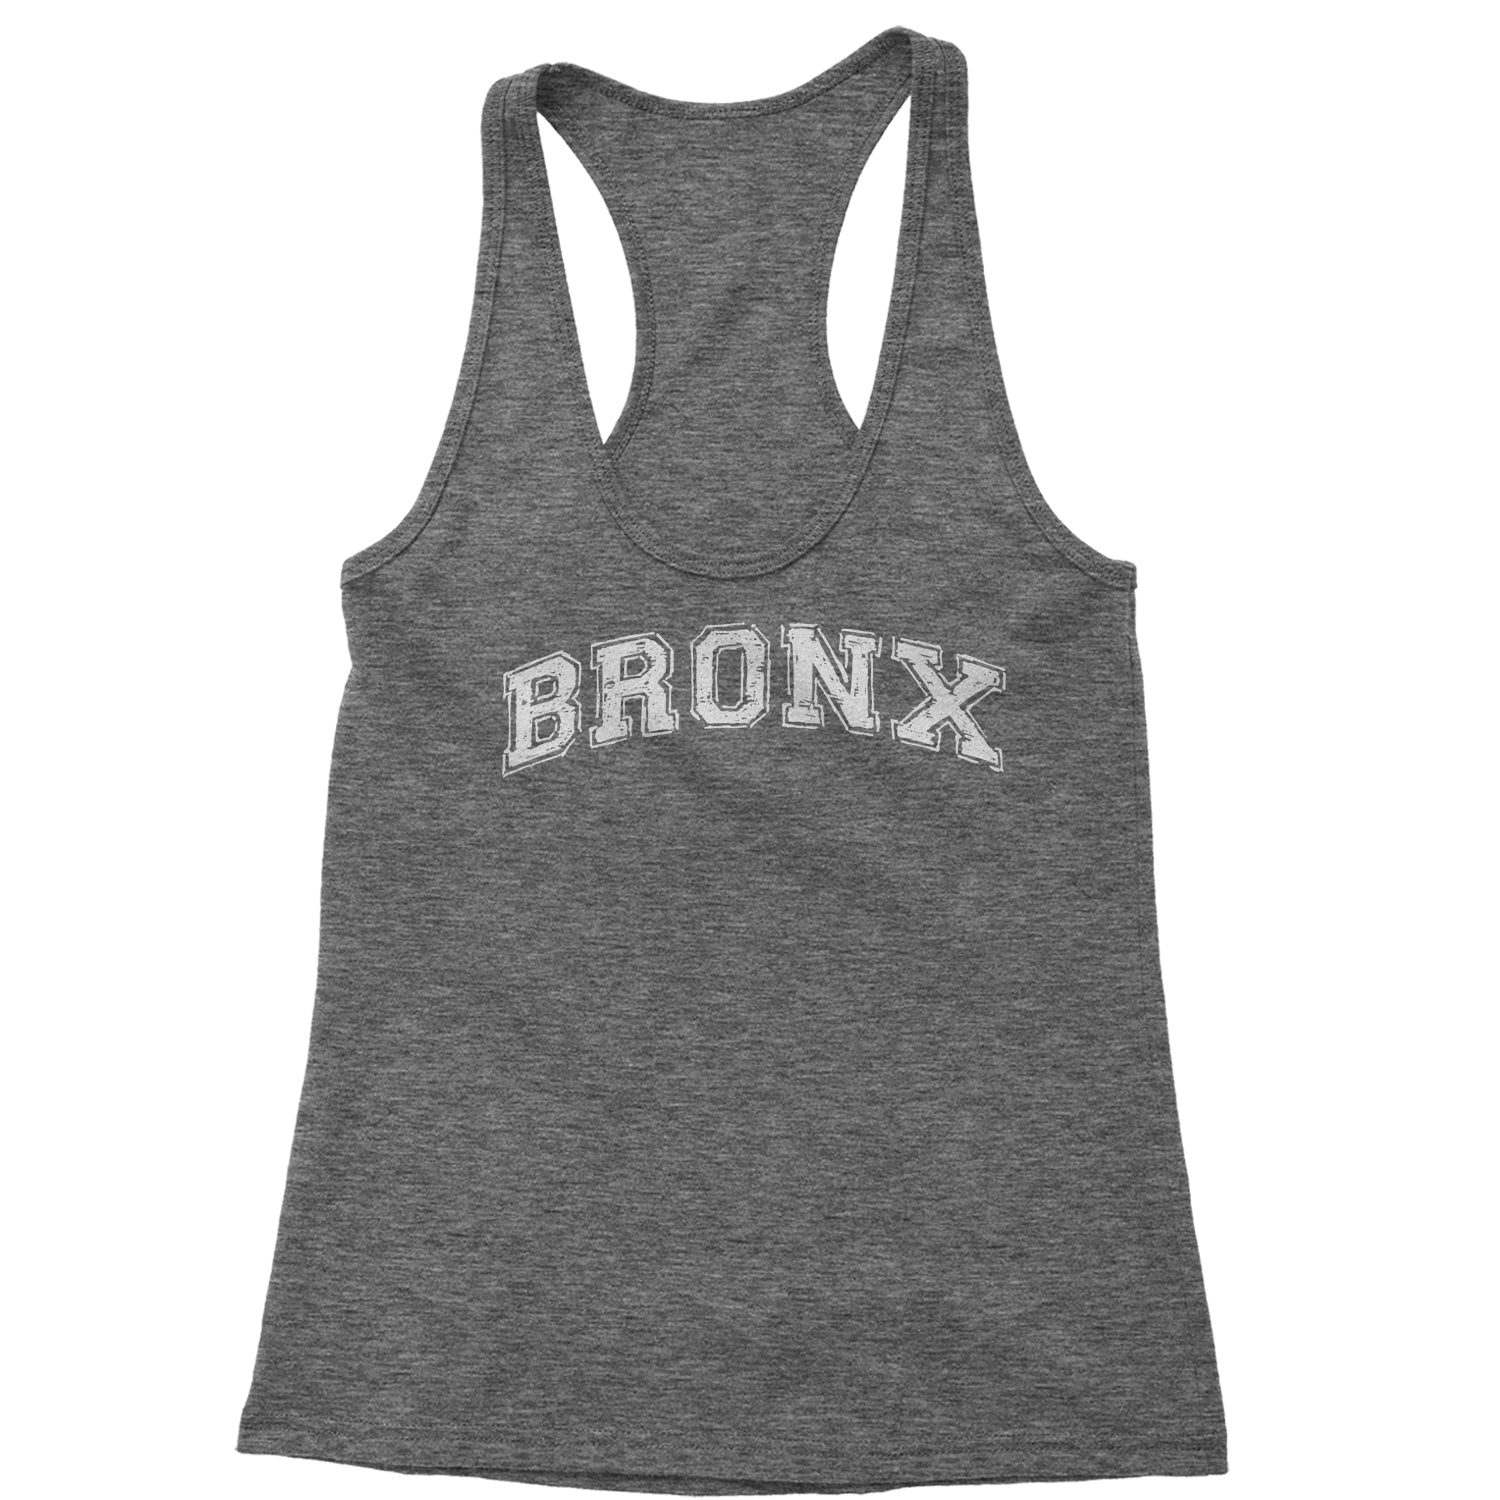 Bronx - From The Block Racerback Tank Top for Women b, cardi, concert, its, Jennifer, lopez, merch, my, party, tour by Expression Tees